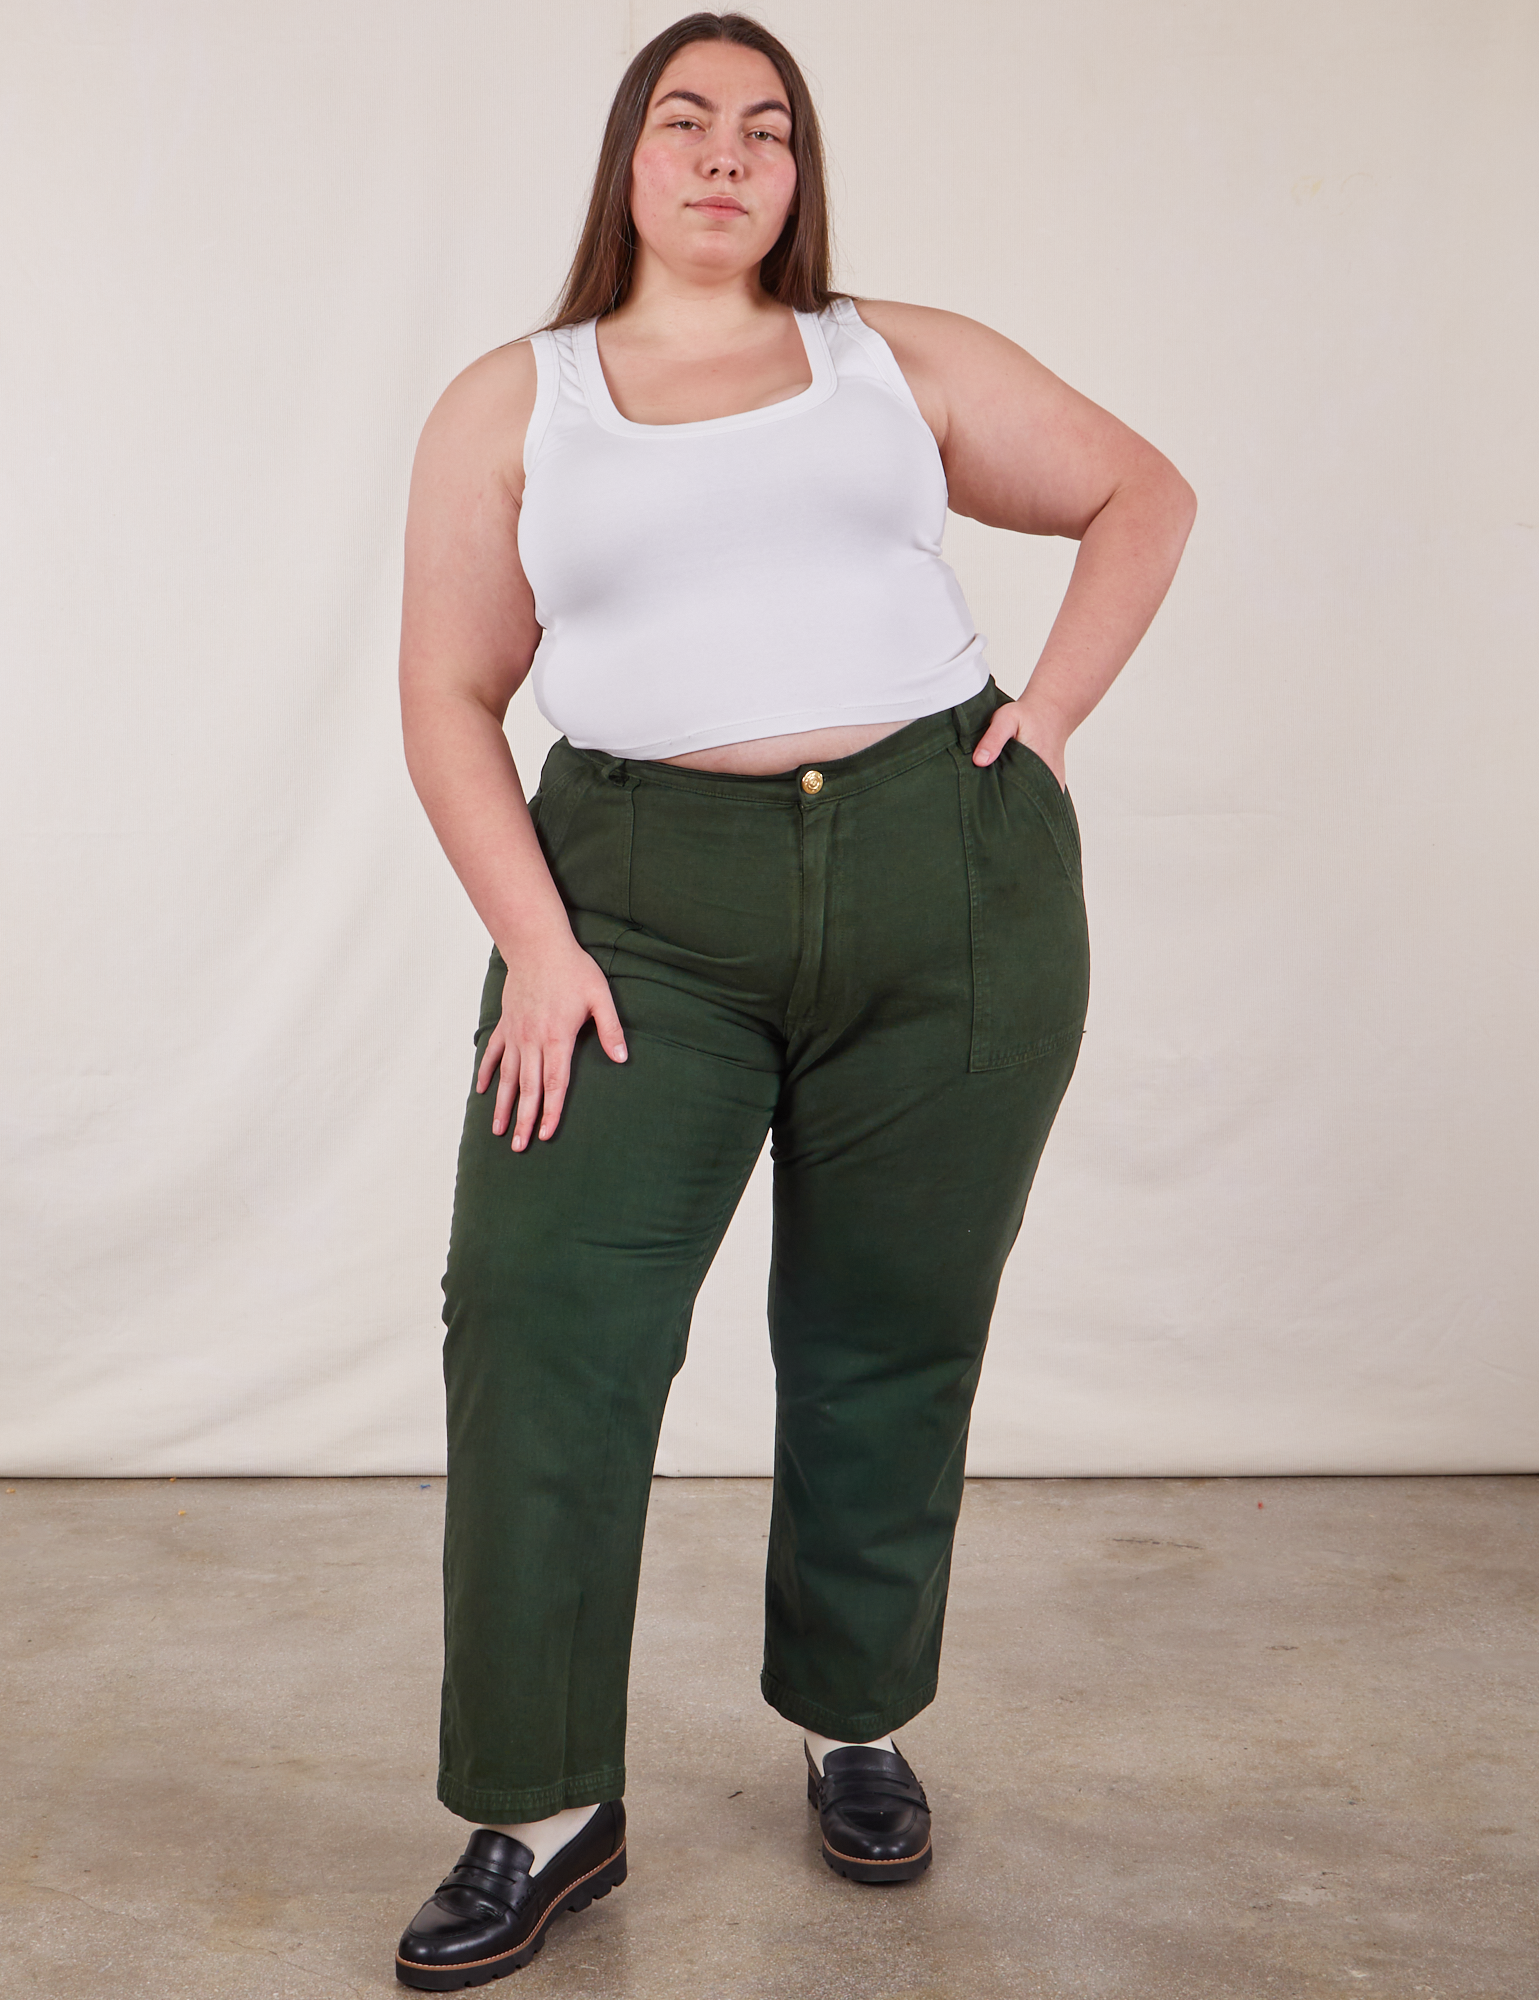 Marielena is wearing Work Pants in Swamp Green and vintage tee off-white Cropped Tank